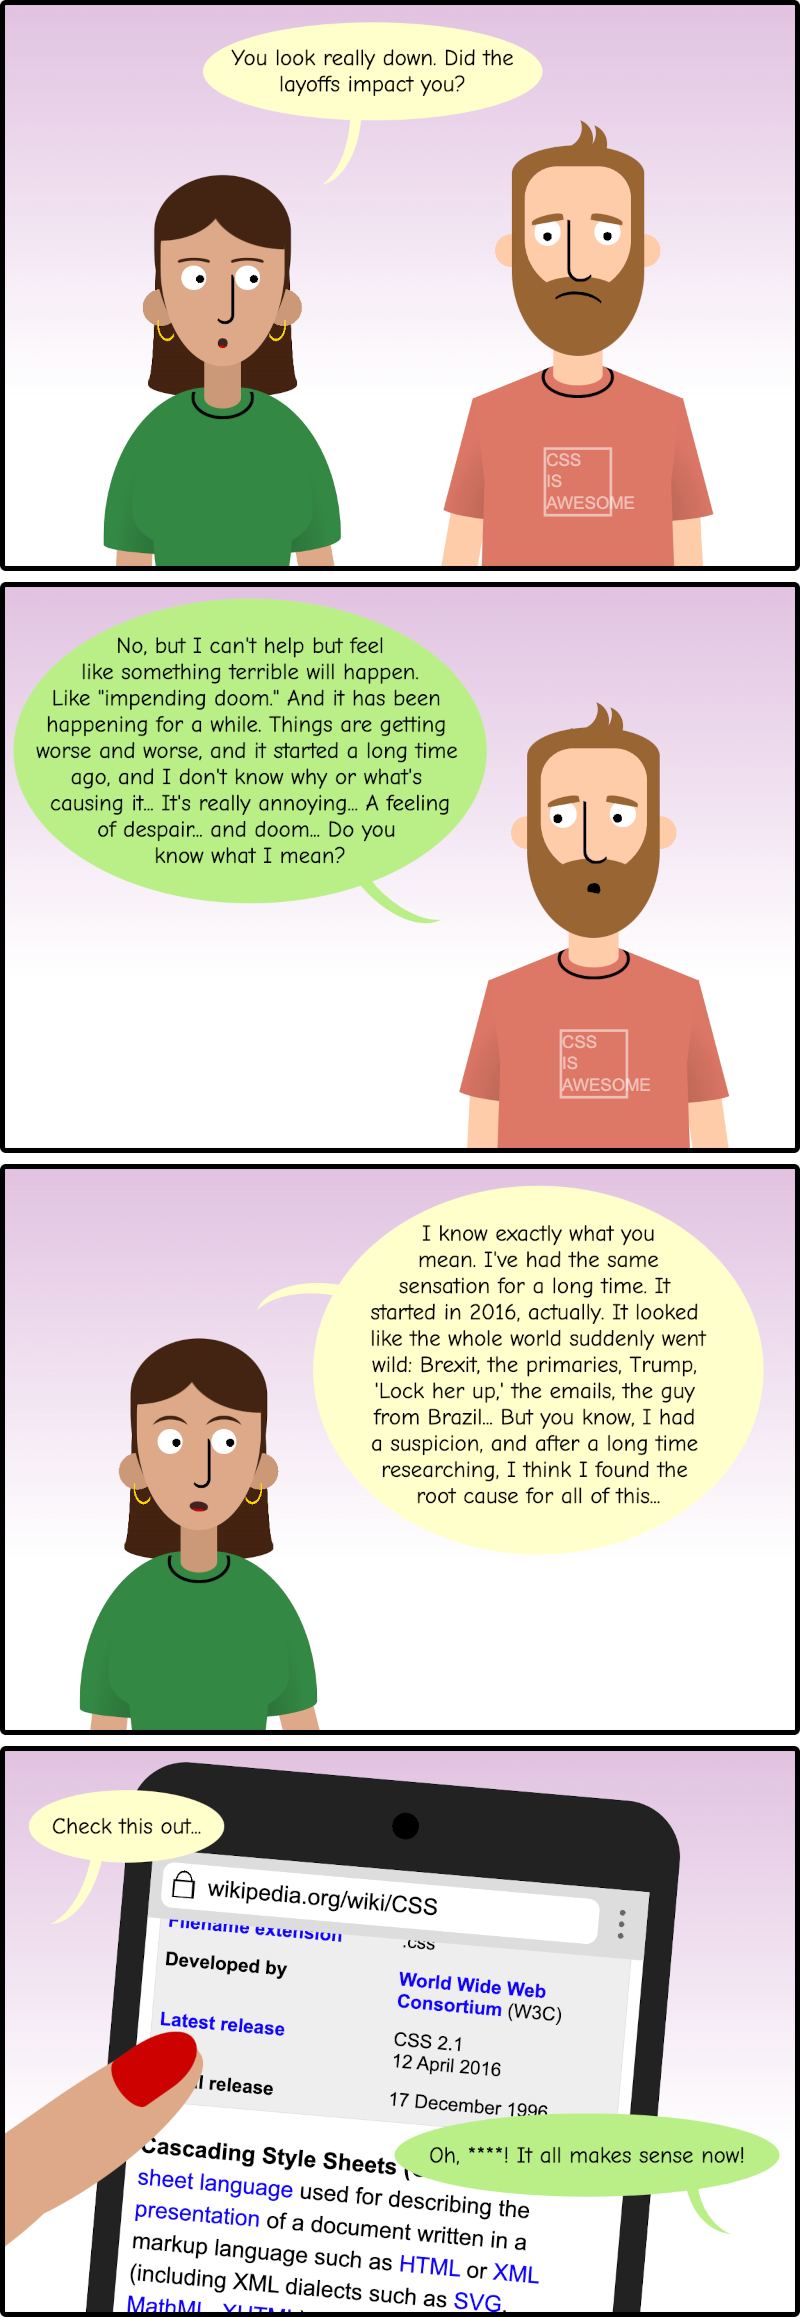 Cartoon with 4 panels showing two people walking. One says 'you look down, did the layoffs impact you?' Then they start a conversation about how everything seems to be going poorly and it has been that way for a long time (2016 to be precise). One says that has been doing research and thinks that has found the root cause, shows the CSS wikipedia article: CSS latest version was published in April 12, 2016.